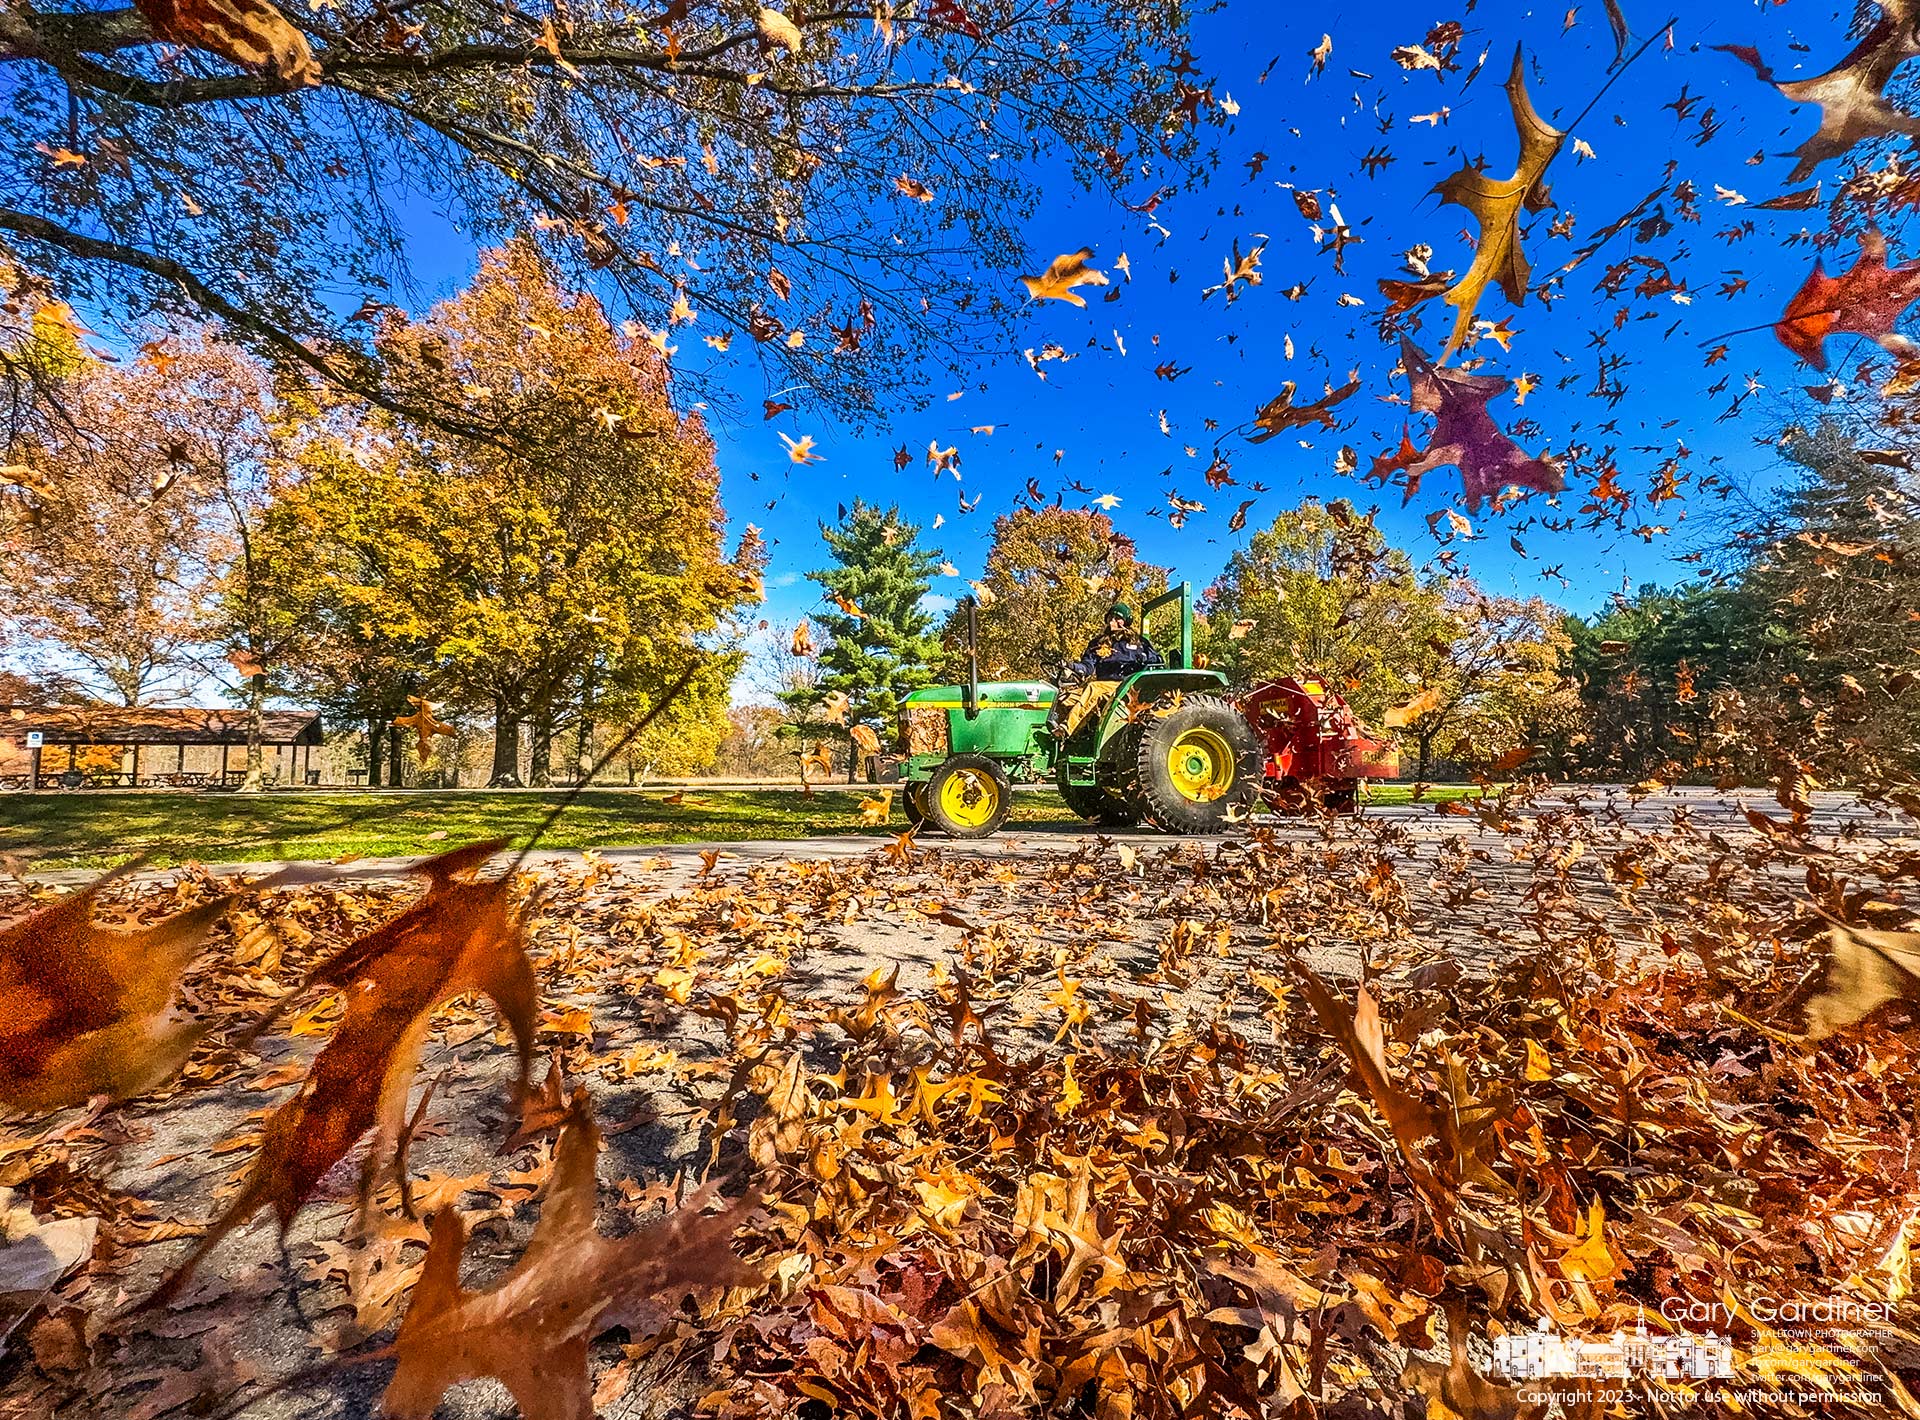 This week begins the once-a-year removal of leaves from the play areas at Sharon Woods Metro Park when the leaves are blown across fields and roads into the nearby woods using a tractor hauling an oversized leaf blower. My Final Photo for November 2, 2023.